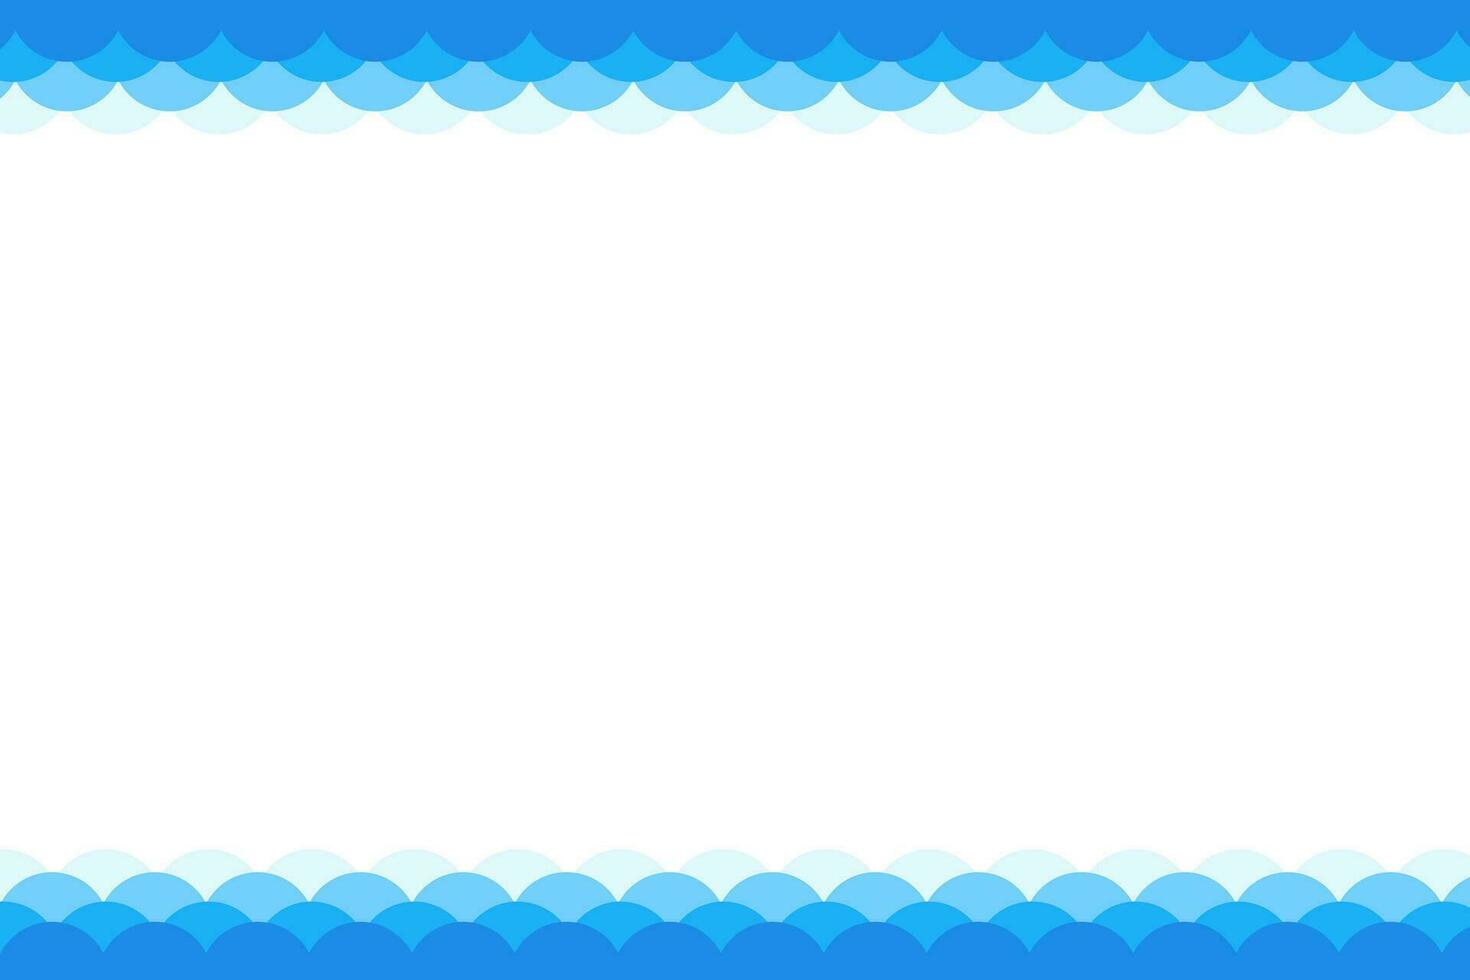 Blue waves with gradient decorative frame border, vector design template, abstract water waves